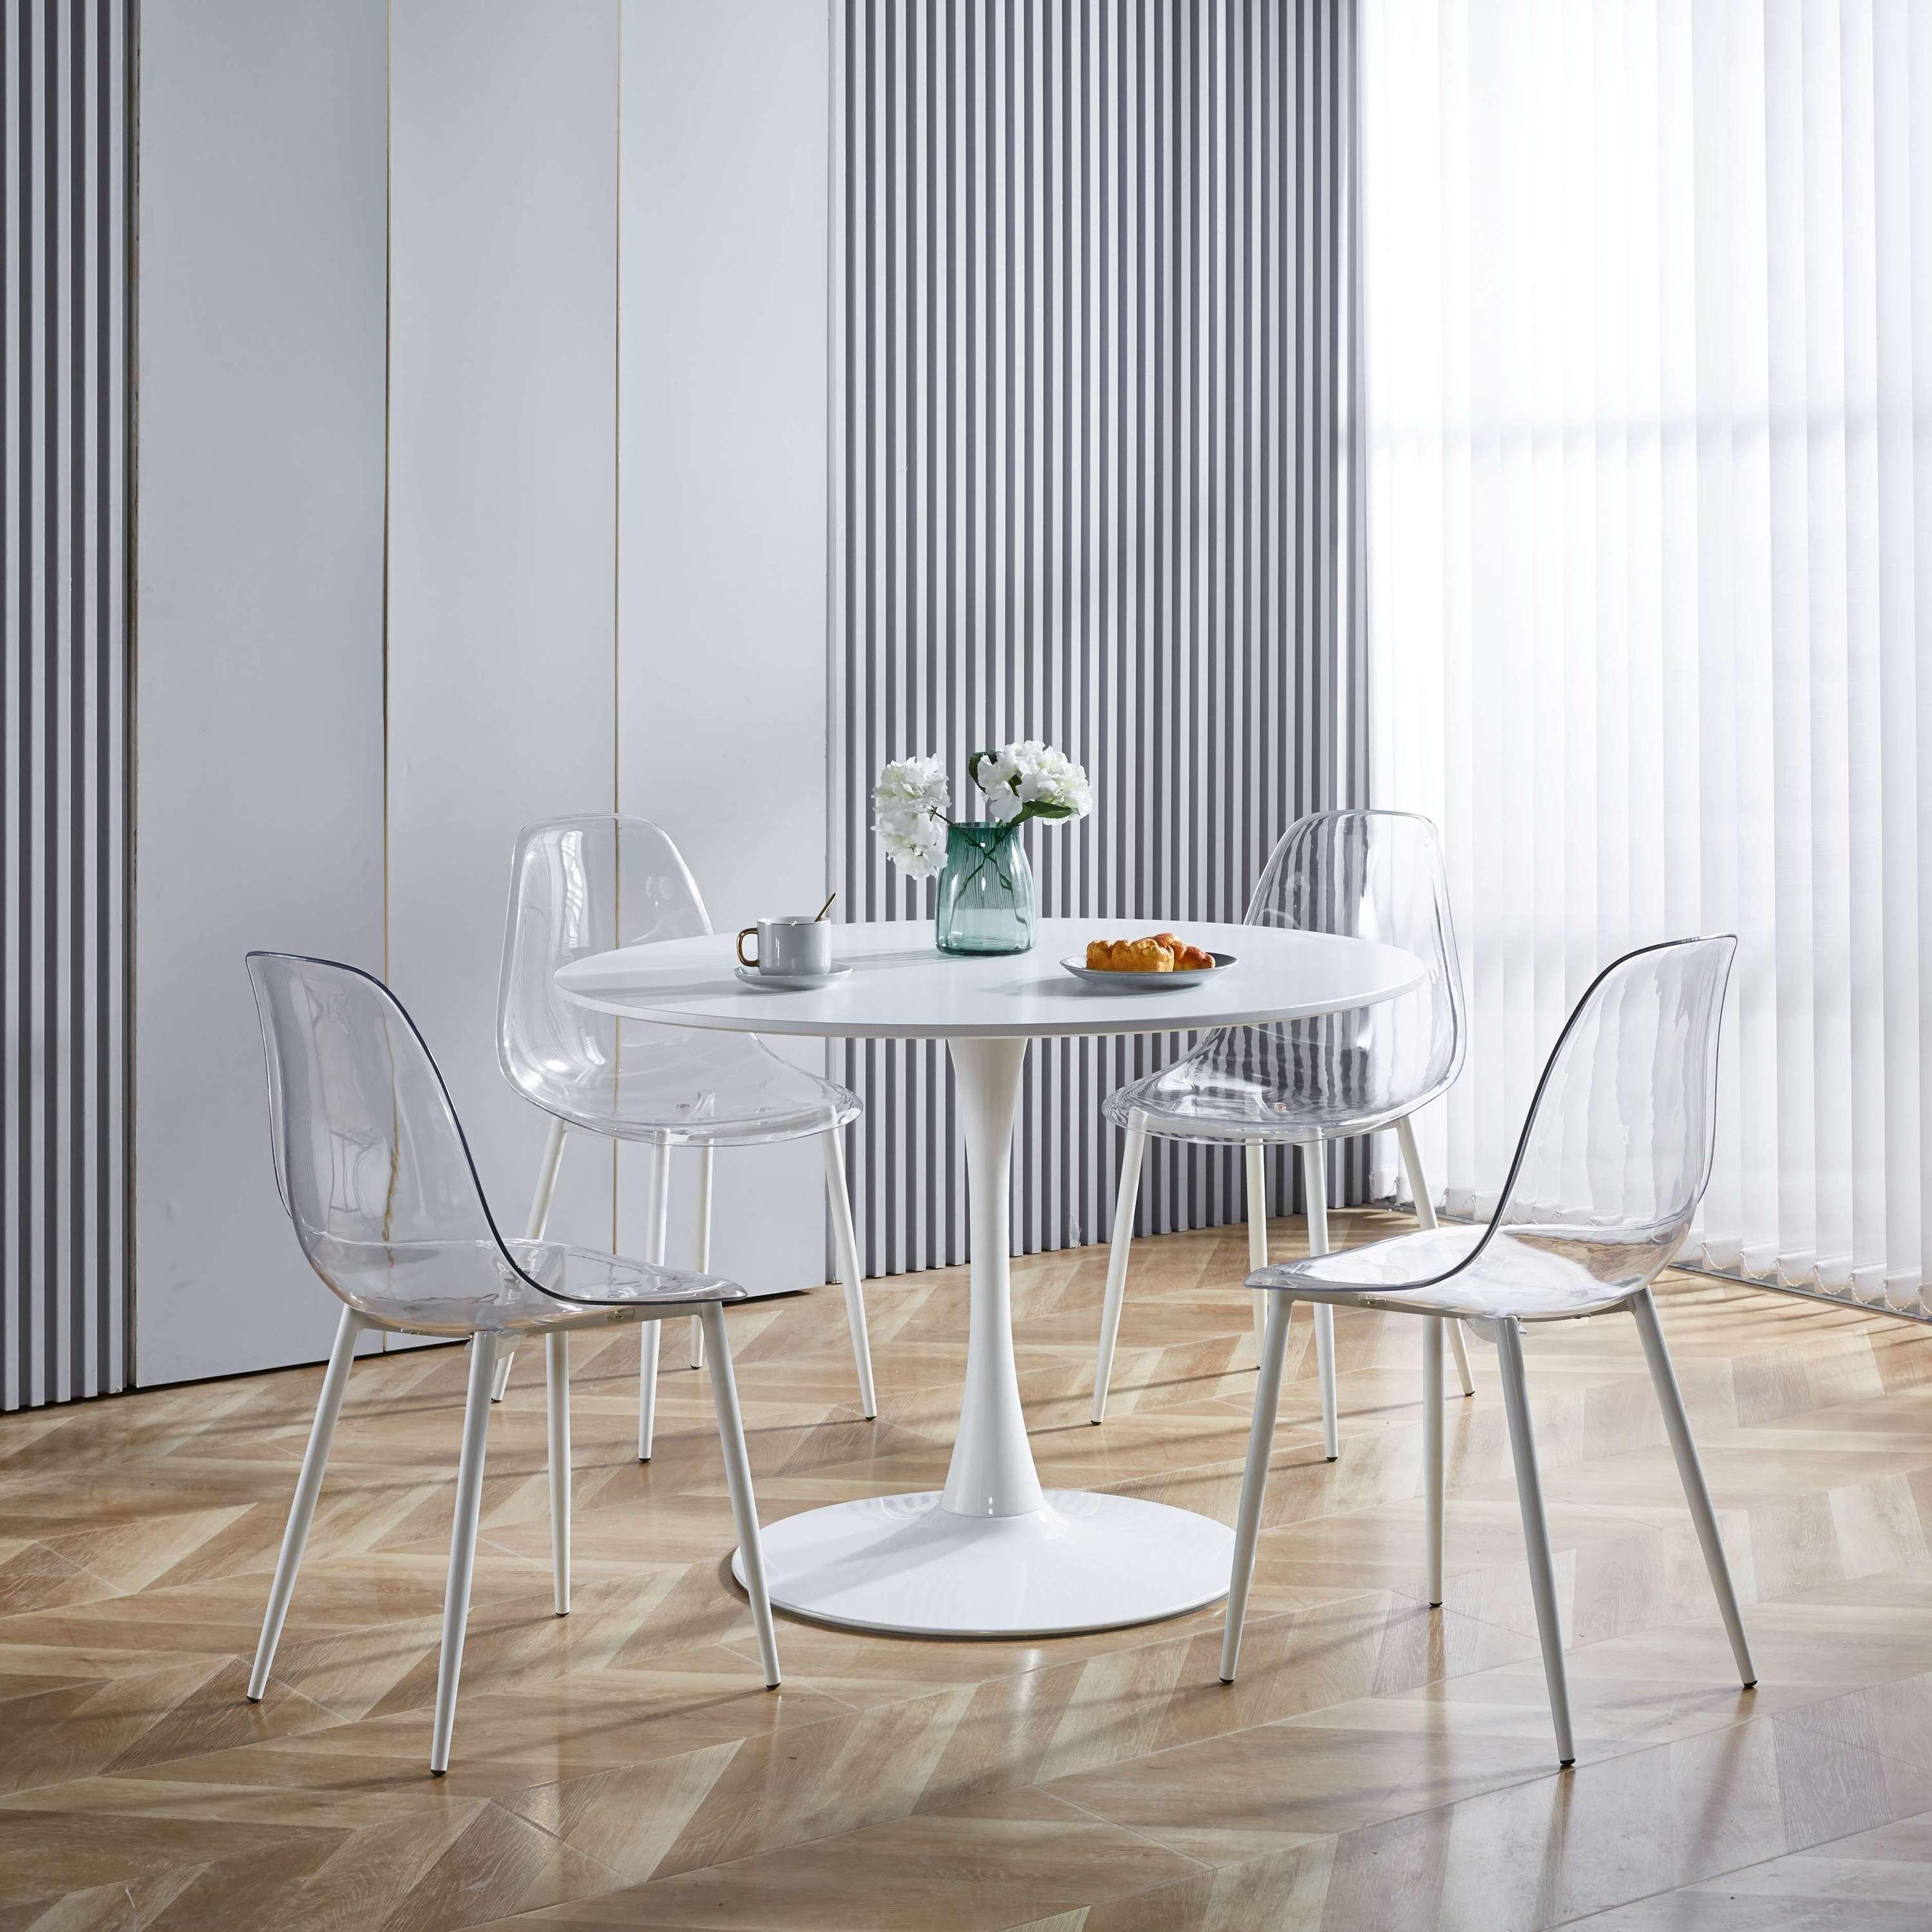 🆓🚛 5 Pcs Dining Set, 1 Roundwhite Mid-Century Dining Table With Mdf Table Top, 4 Transparent Chairs